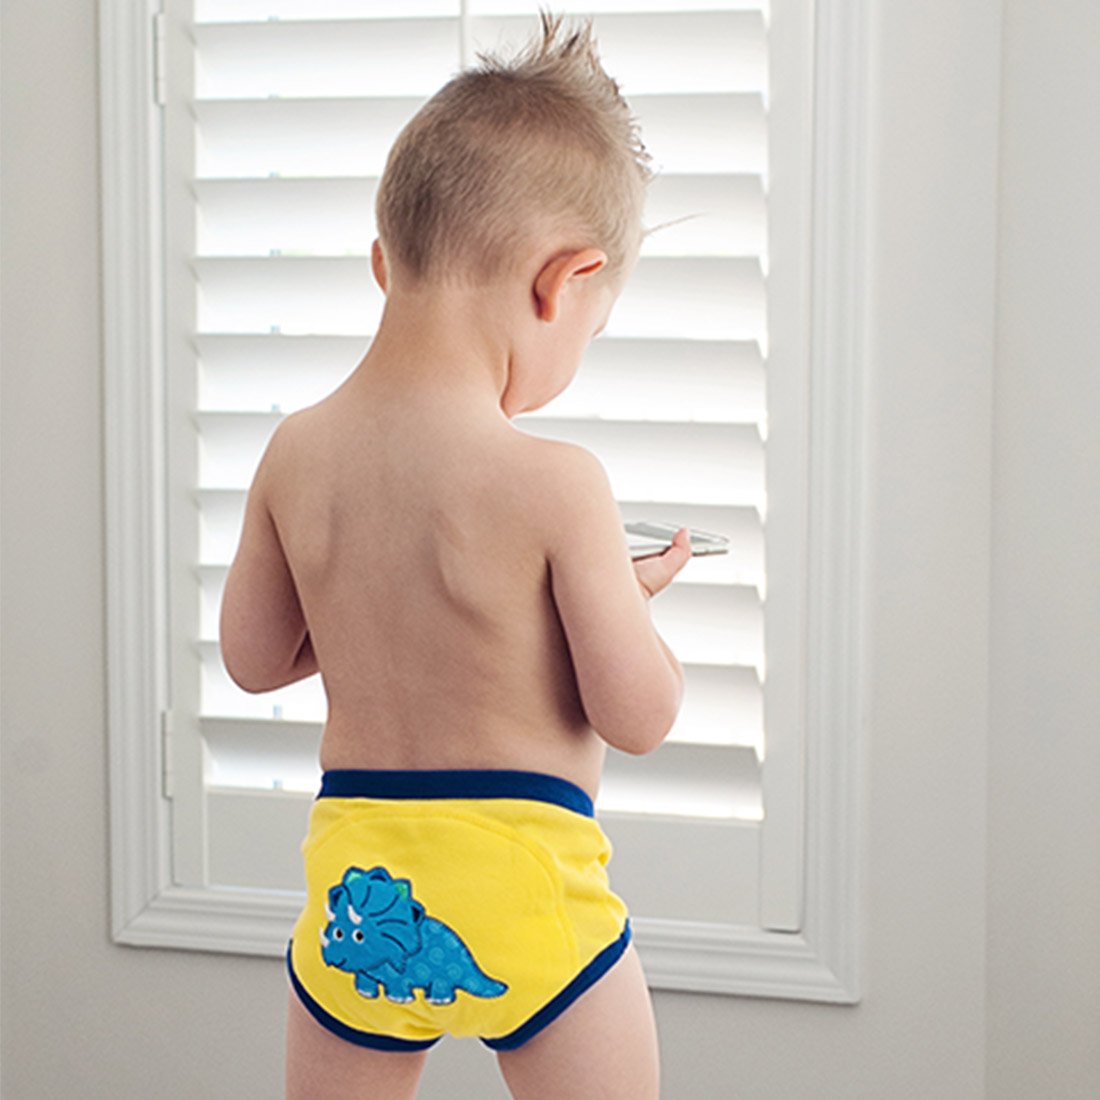 How To Potty Train In A Weekend And Be Done! - Cape & Apron